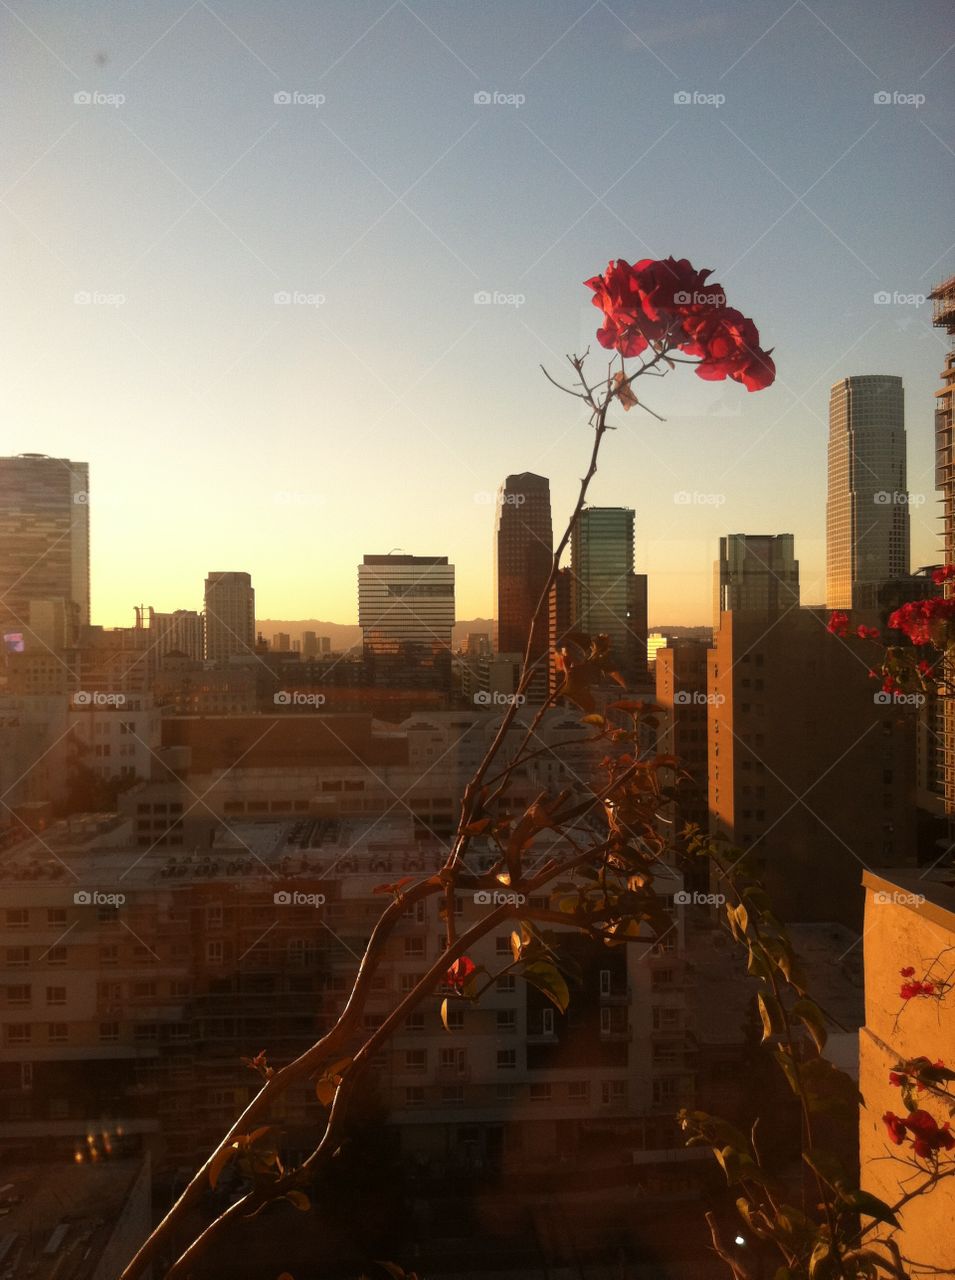 A solitary rose grows on a rooftop of a tall building, overlooking the Downtown Los Angeles Skyline.  